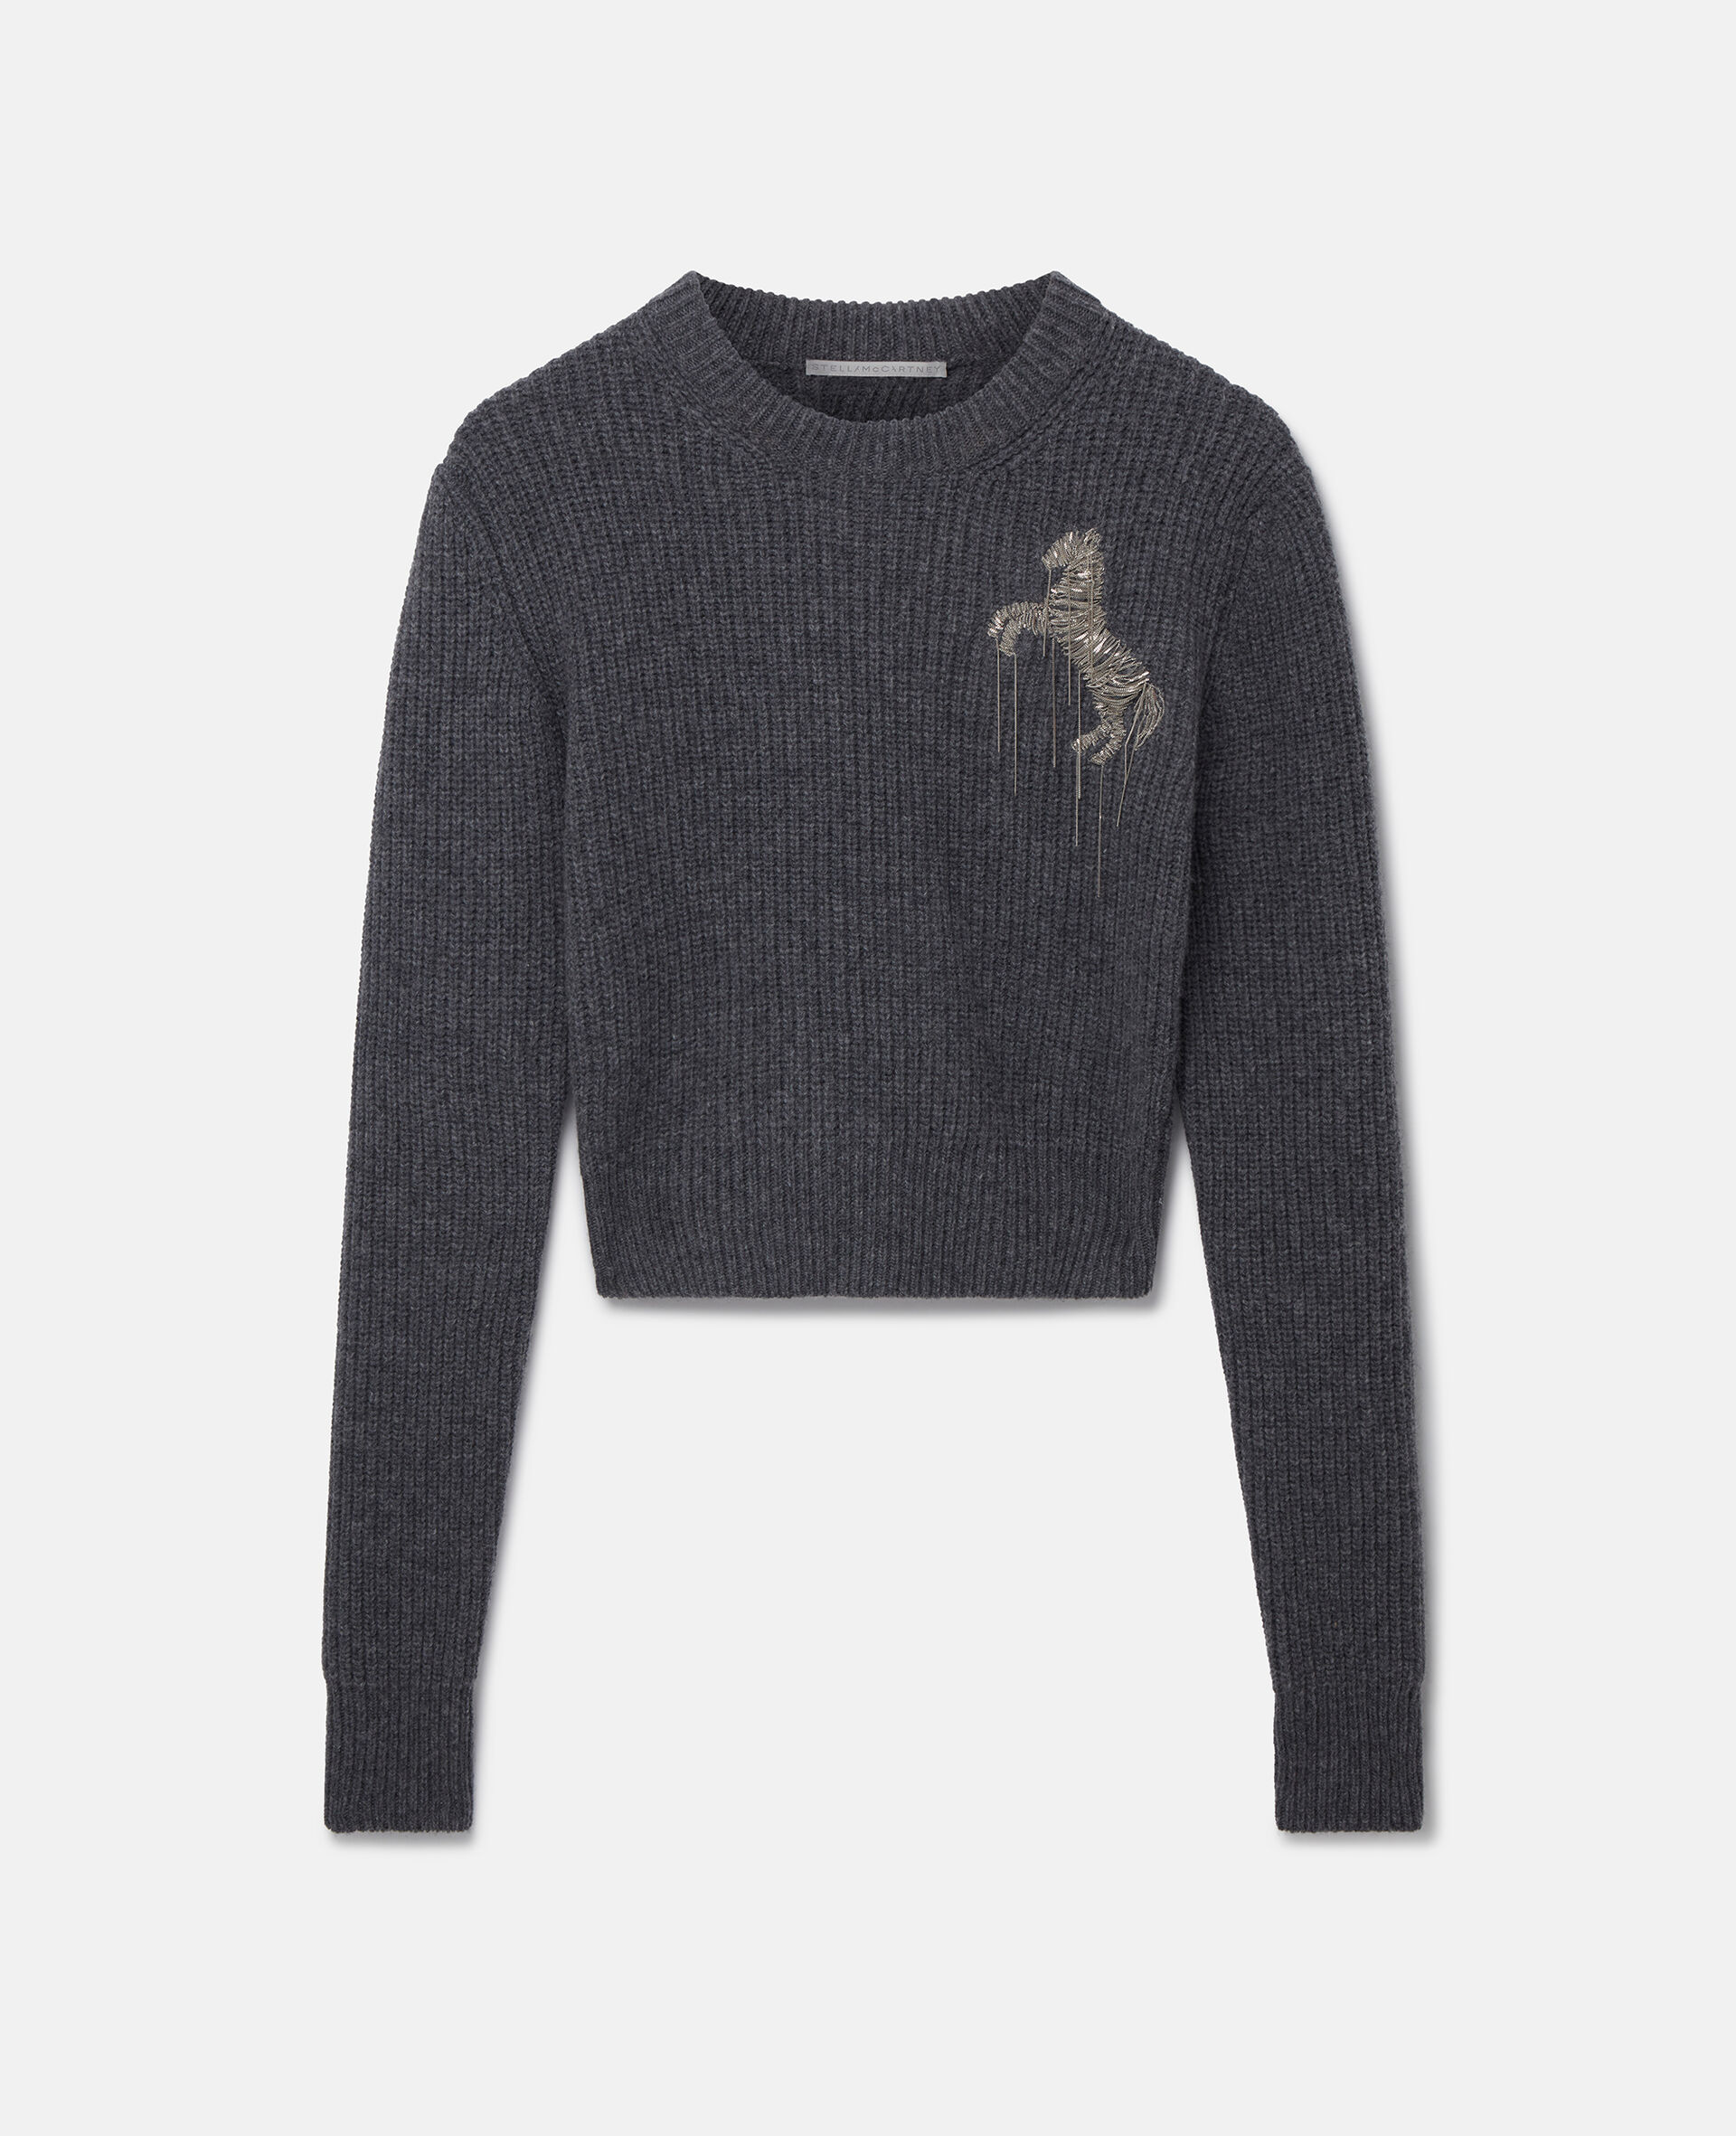 Horse Chain Embroidery Cropped Jumper-Multicolour-medium